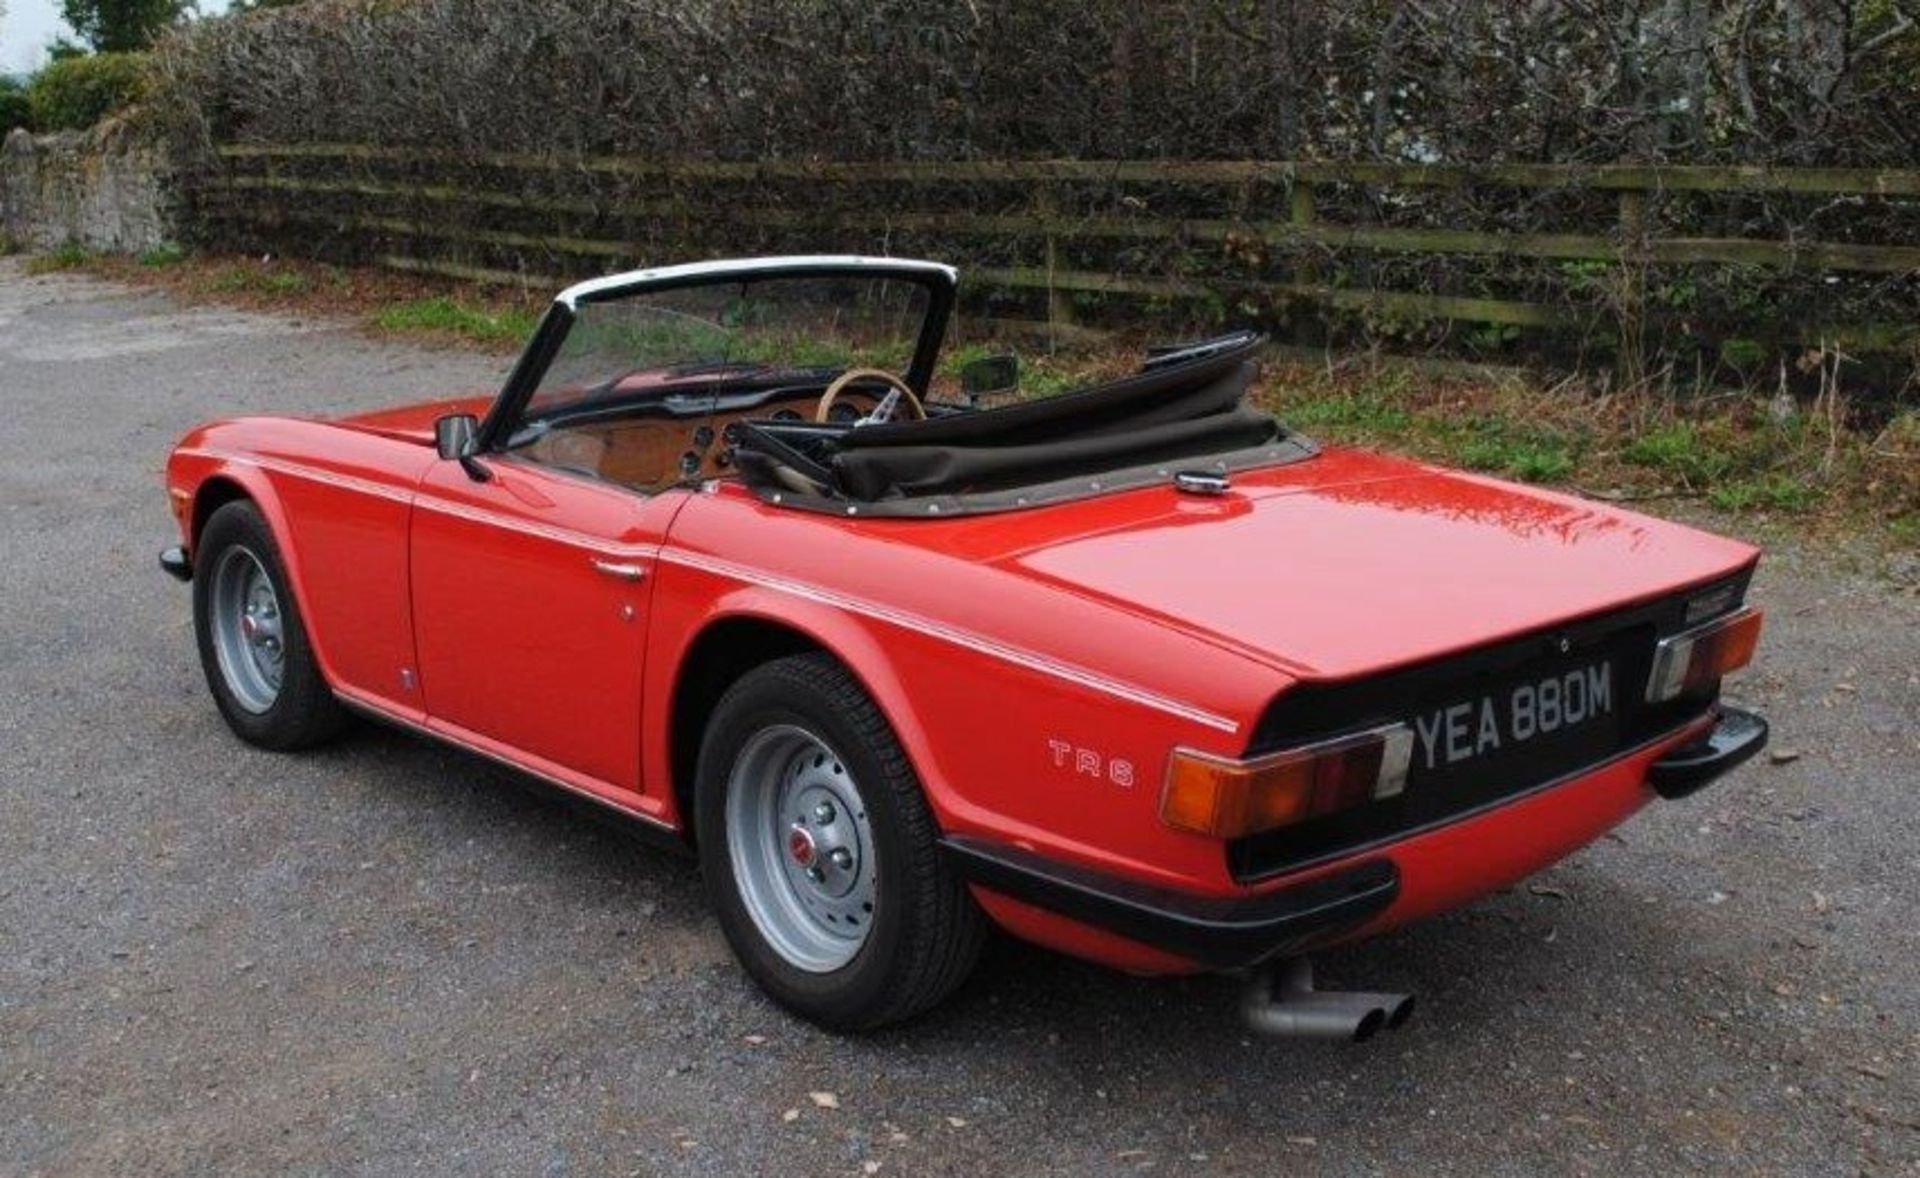 1974 TRIUMPH TR6 Registration Number: YEA 880M Chassis Number: CR51799 Recorded Mileage: 93,000 - Image 4 of 26